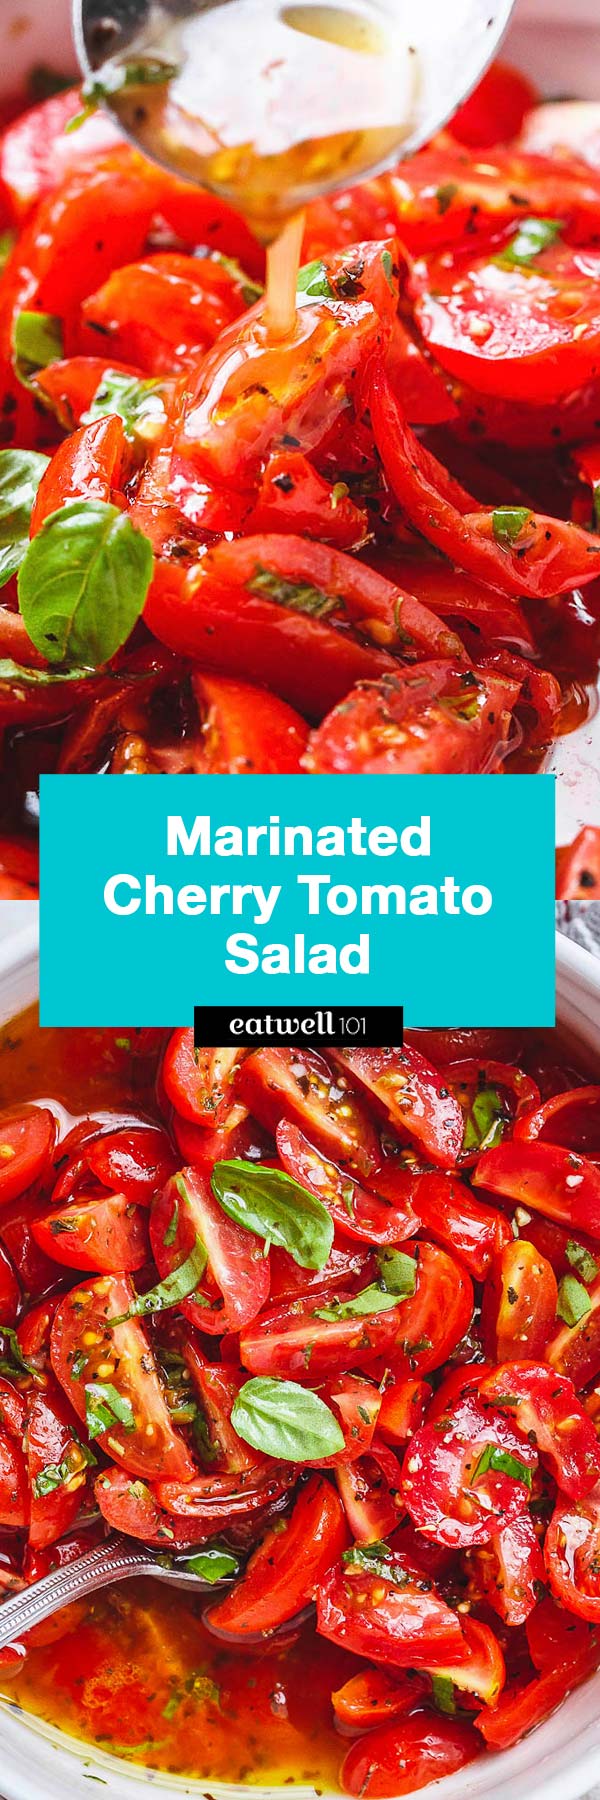 Marinated Cherry Tomato Salad - Really, reeeeeeally delicious! A super simple tomato salad with a punch of flavor.